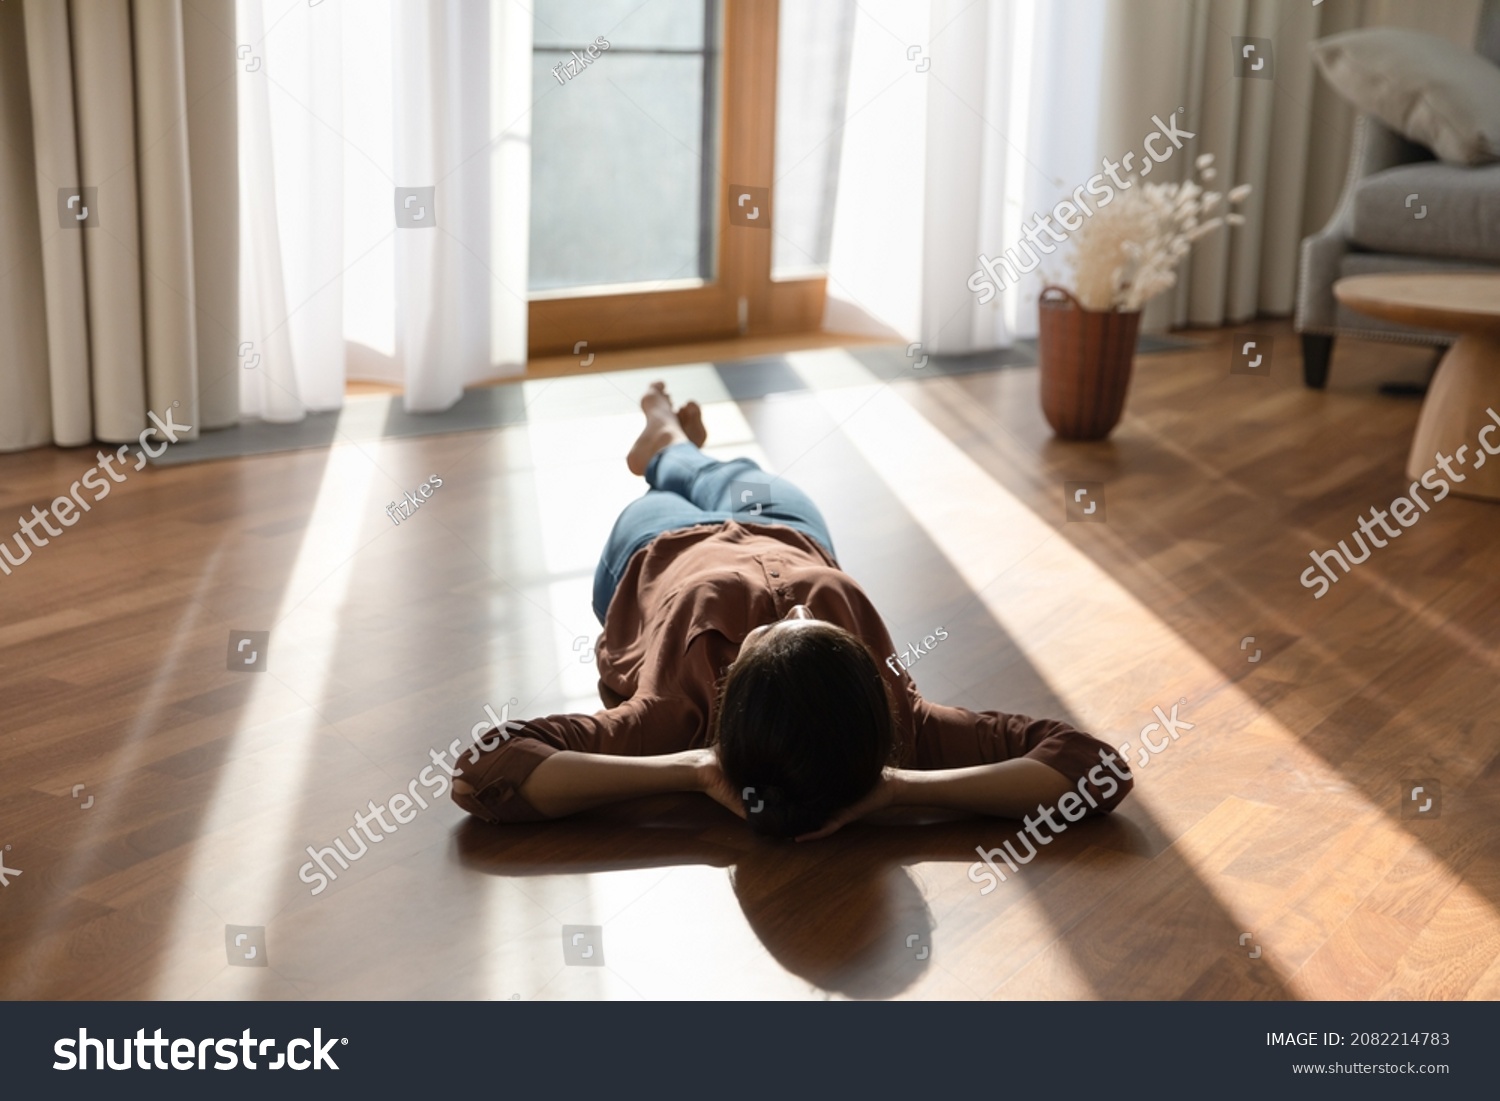 Relaxed happy young indian ethnicity woman homeowner lying alone on warm wooden floor with underfloor heating, enjoying carefree peaceful weekend leisure time alone in modern stylish living room. #2082214783